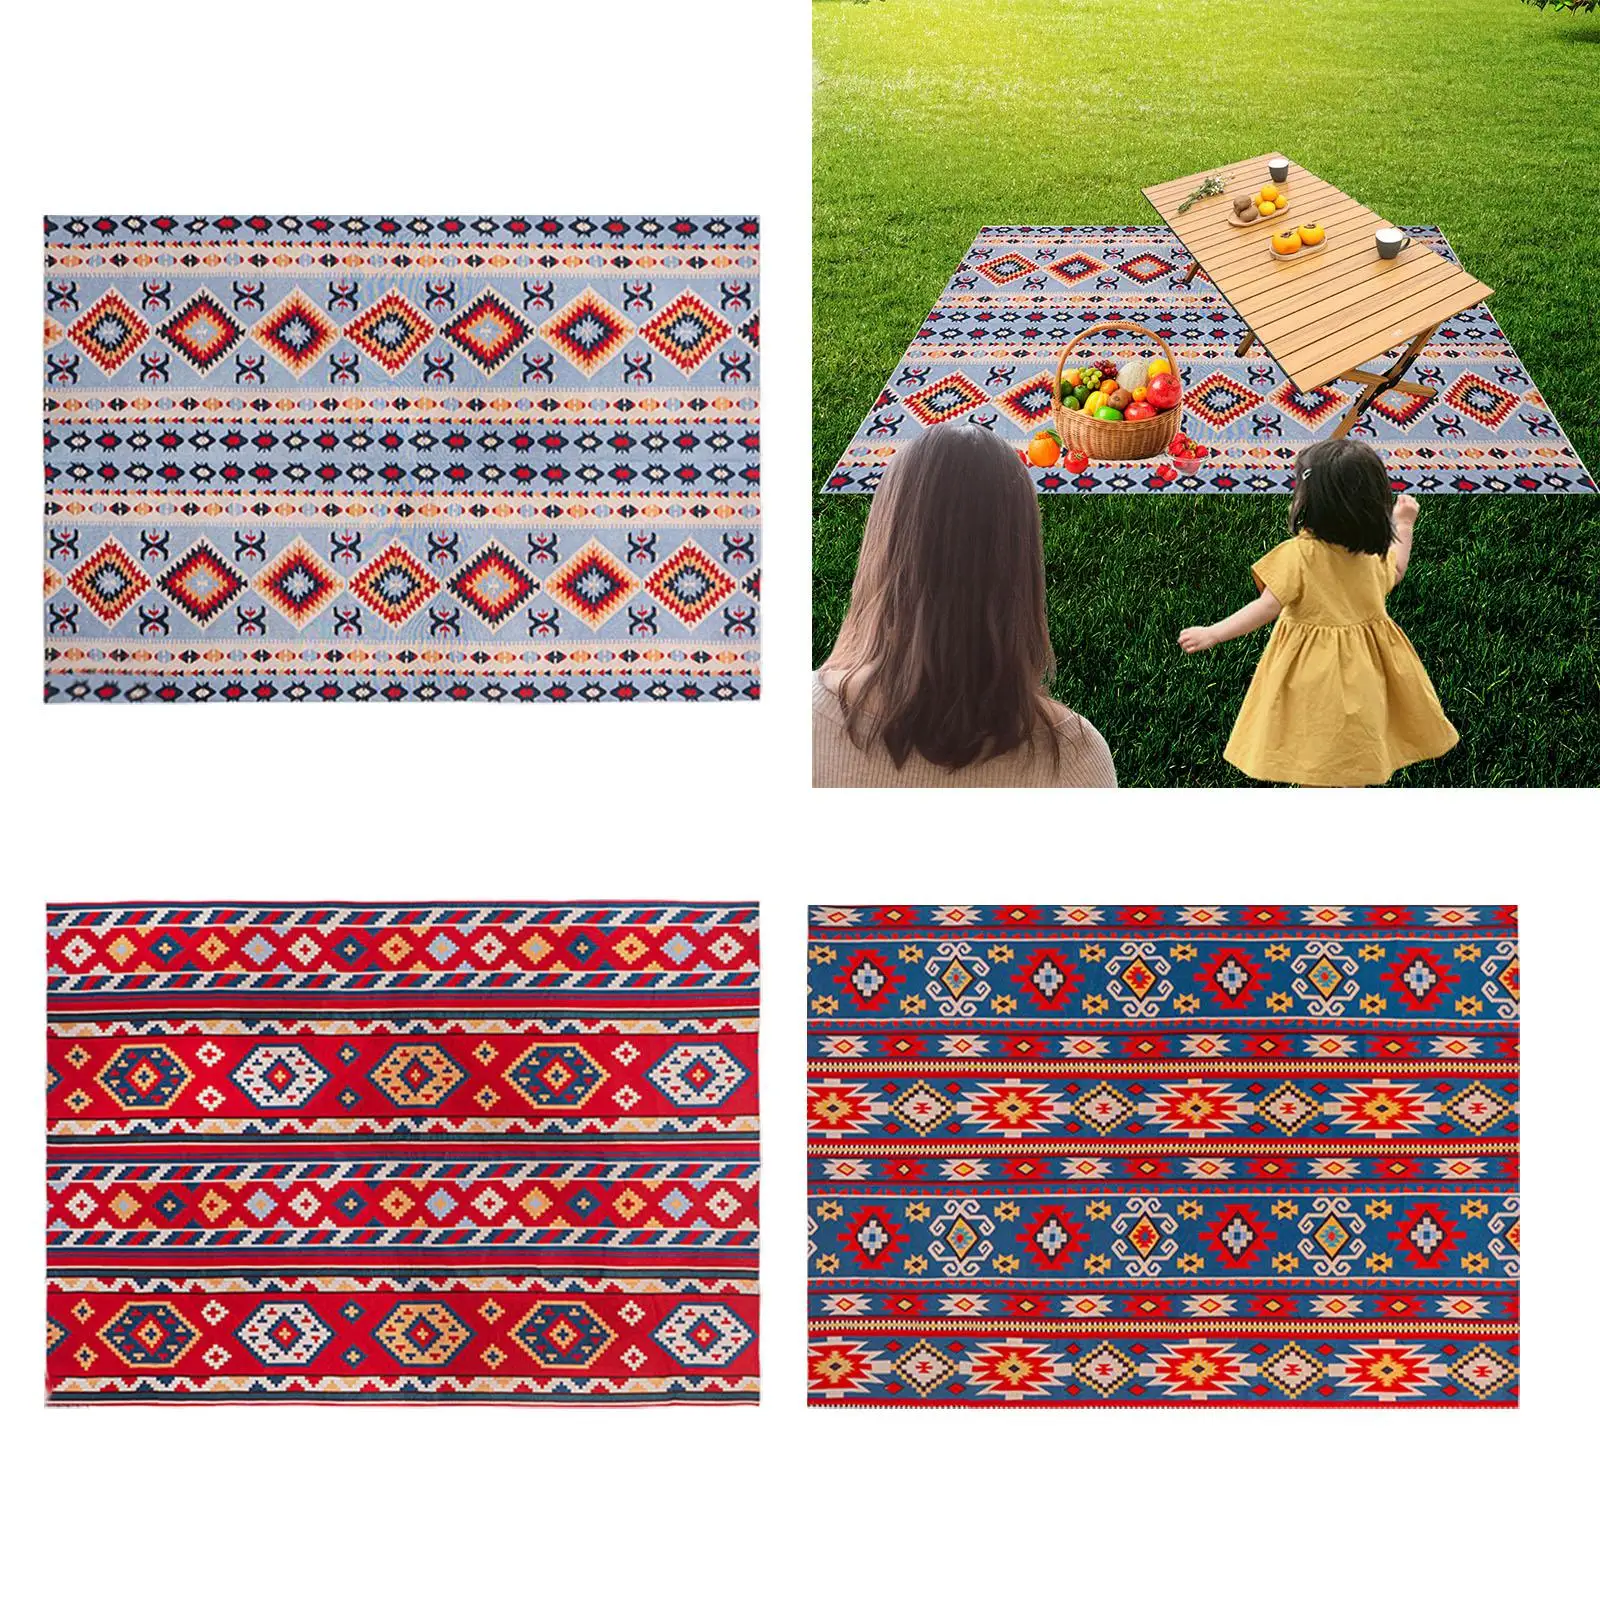 Large Picnic Outdoor Blanket Family Mat Foldable Portable Protective Outdoor Mat for Grass Garden Sports Travel Sporting Events